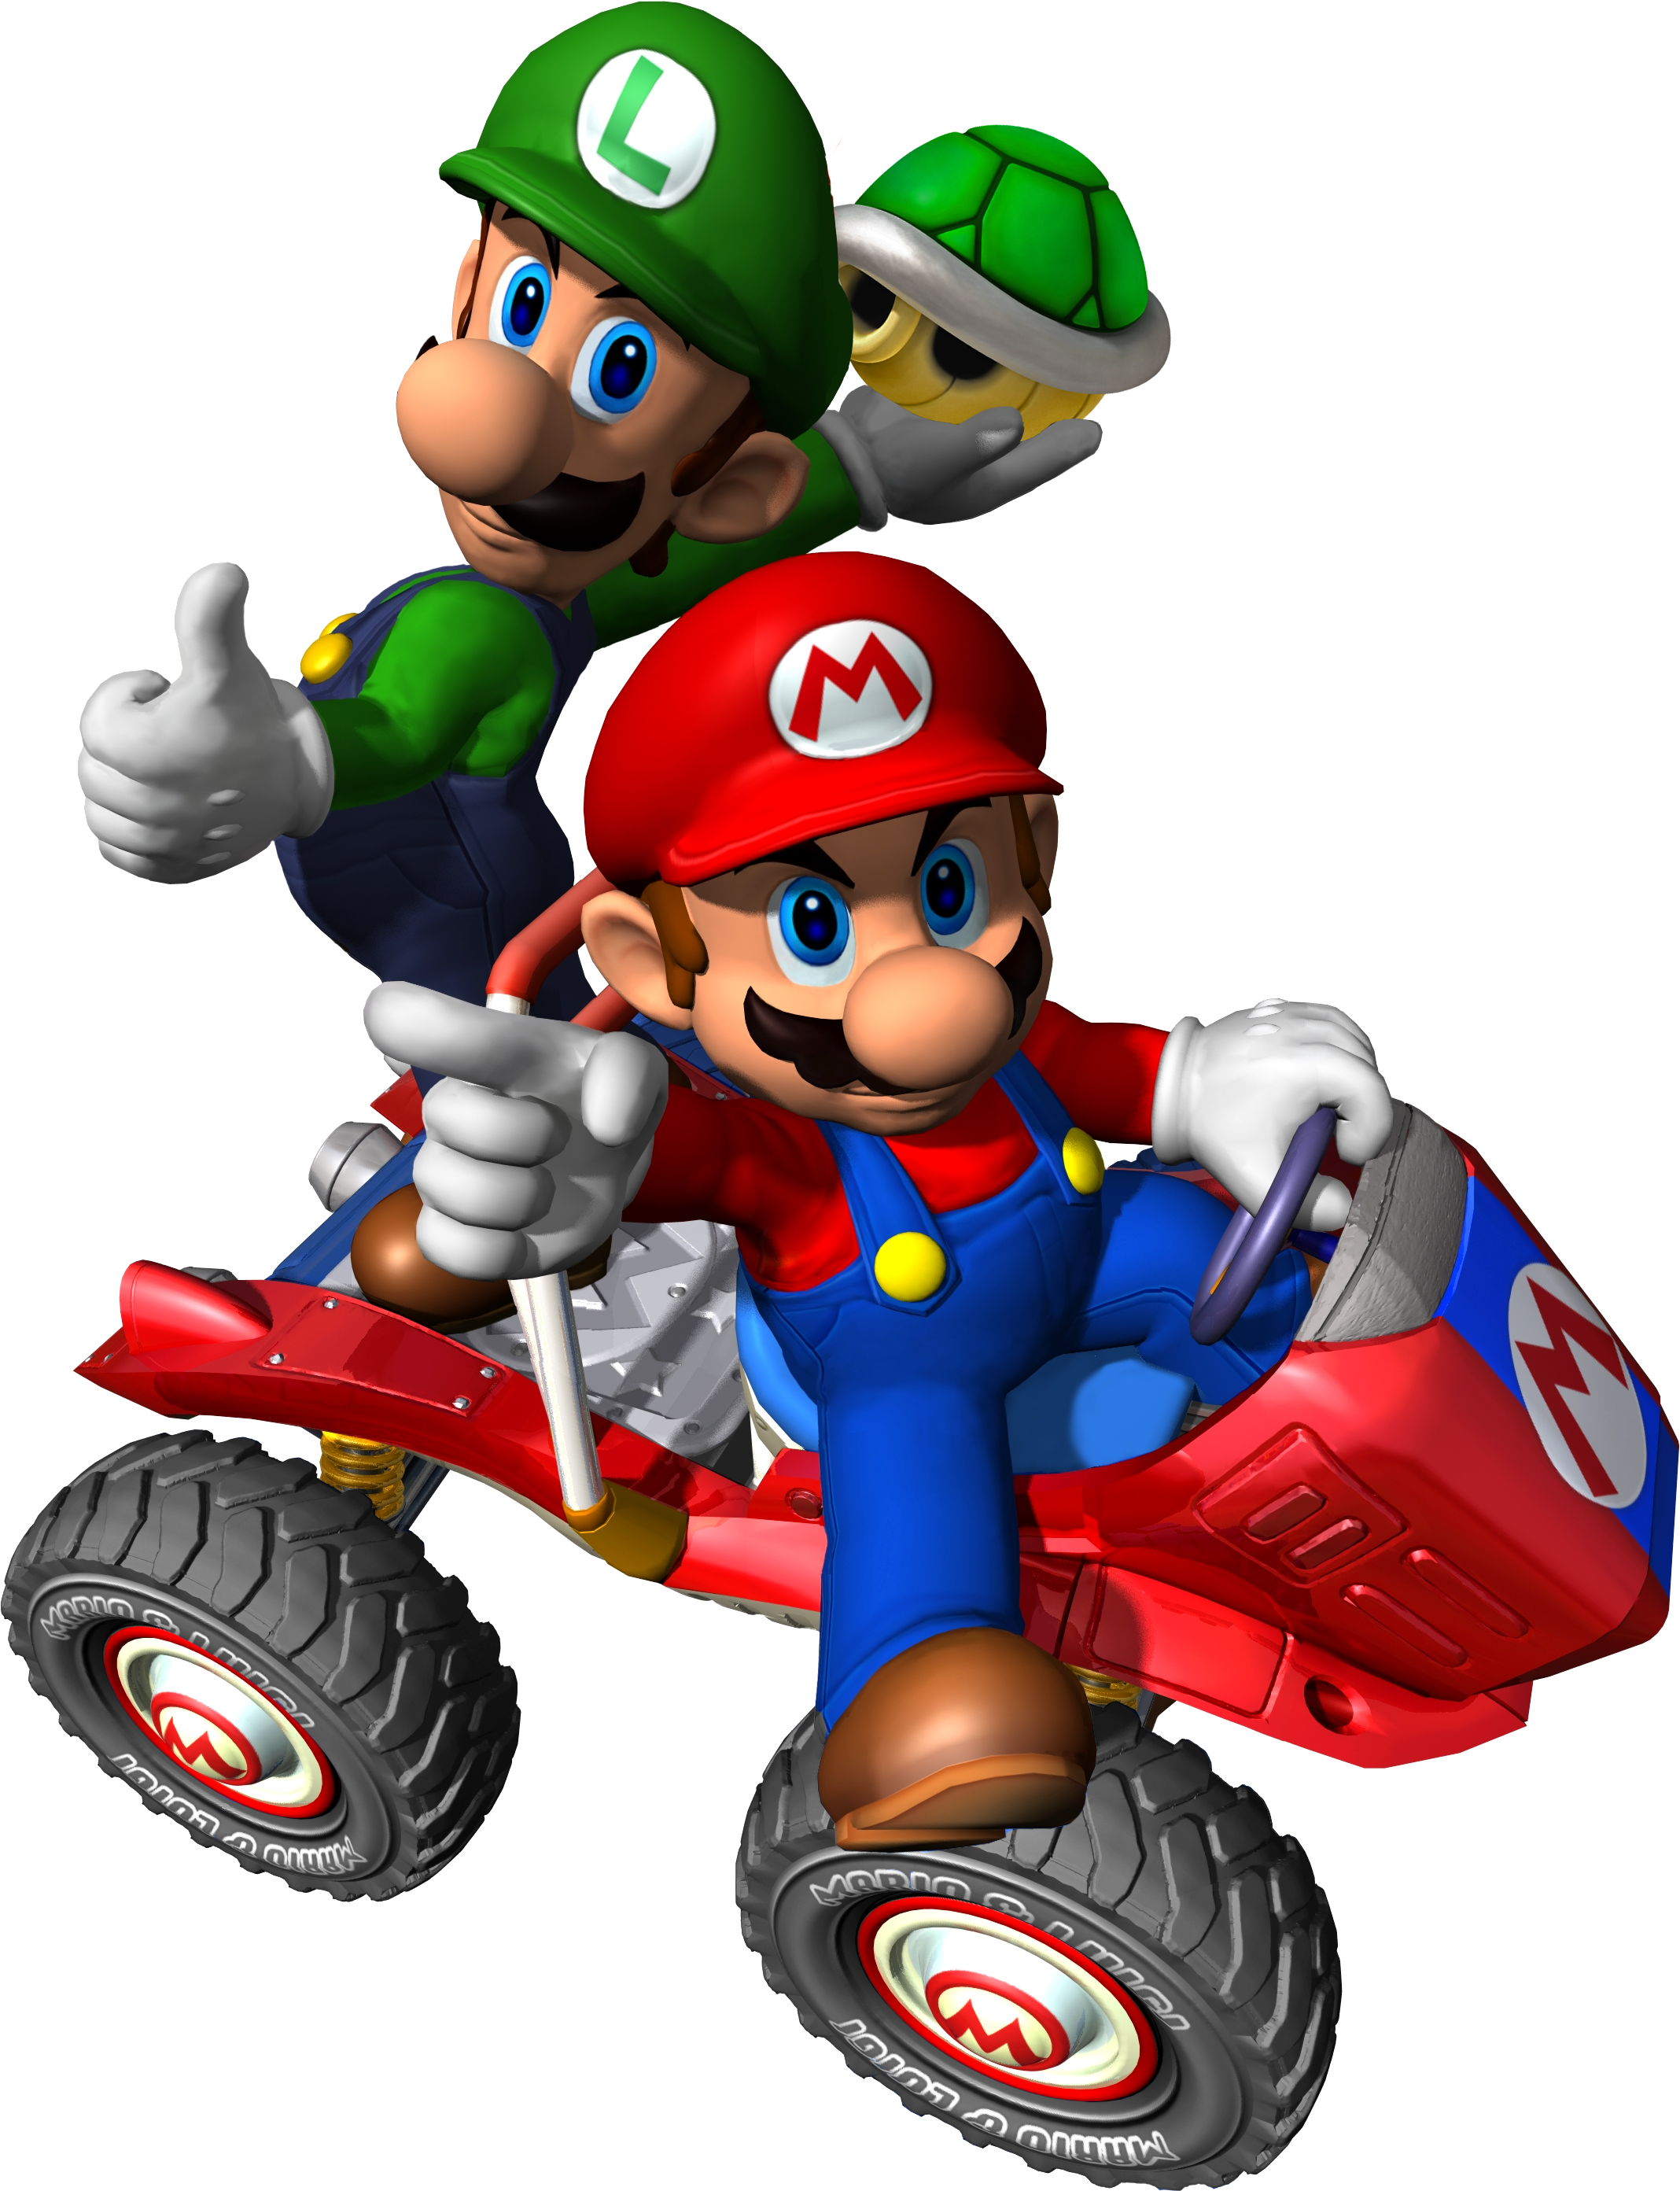 Mario And Luigi Png Transparent Image Mario Kart Double Dash Mario And Luigi Clipart Large Size Png Image Pikpng